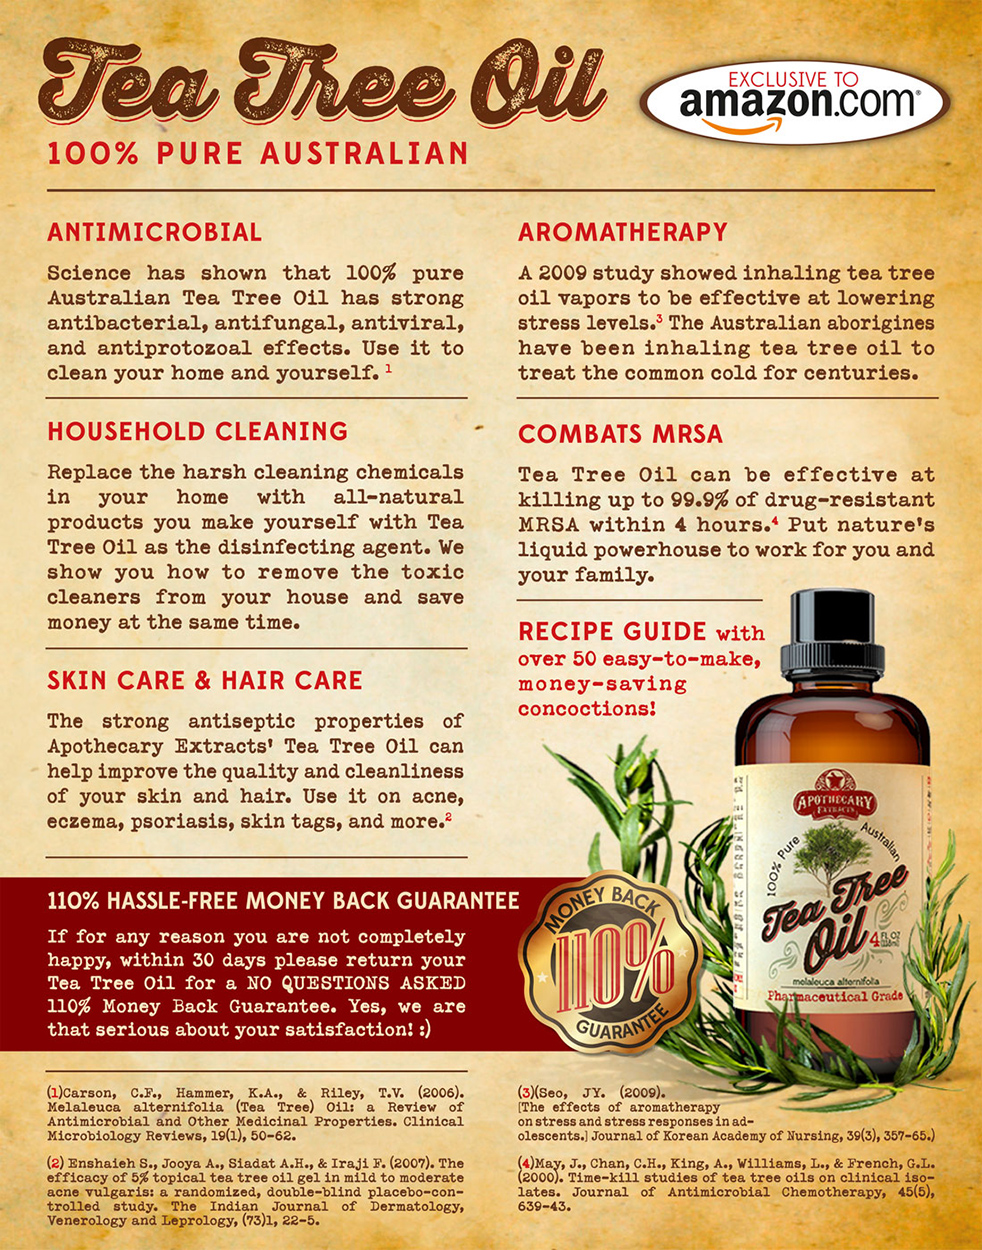 Apothecary Extracts 100% Pure Australian Tree Oil - Just of Crazy